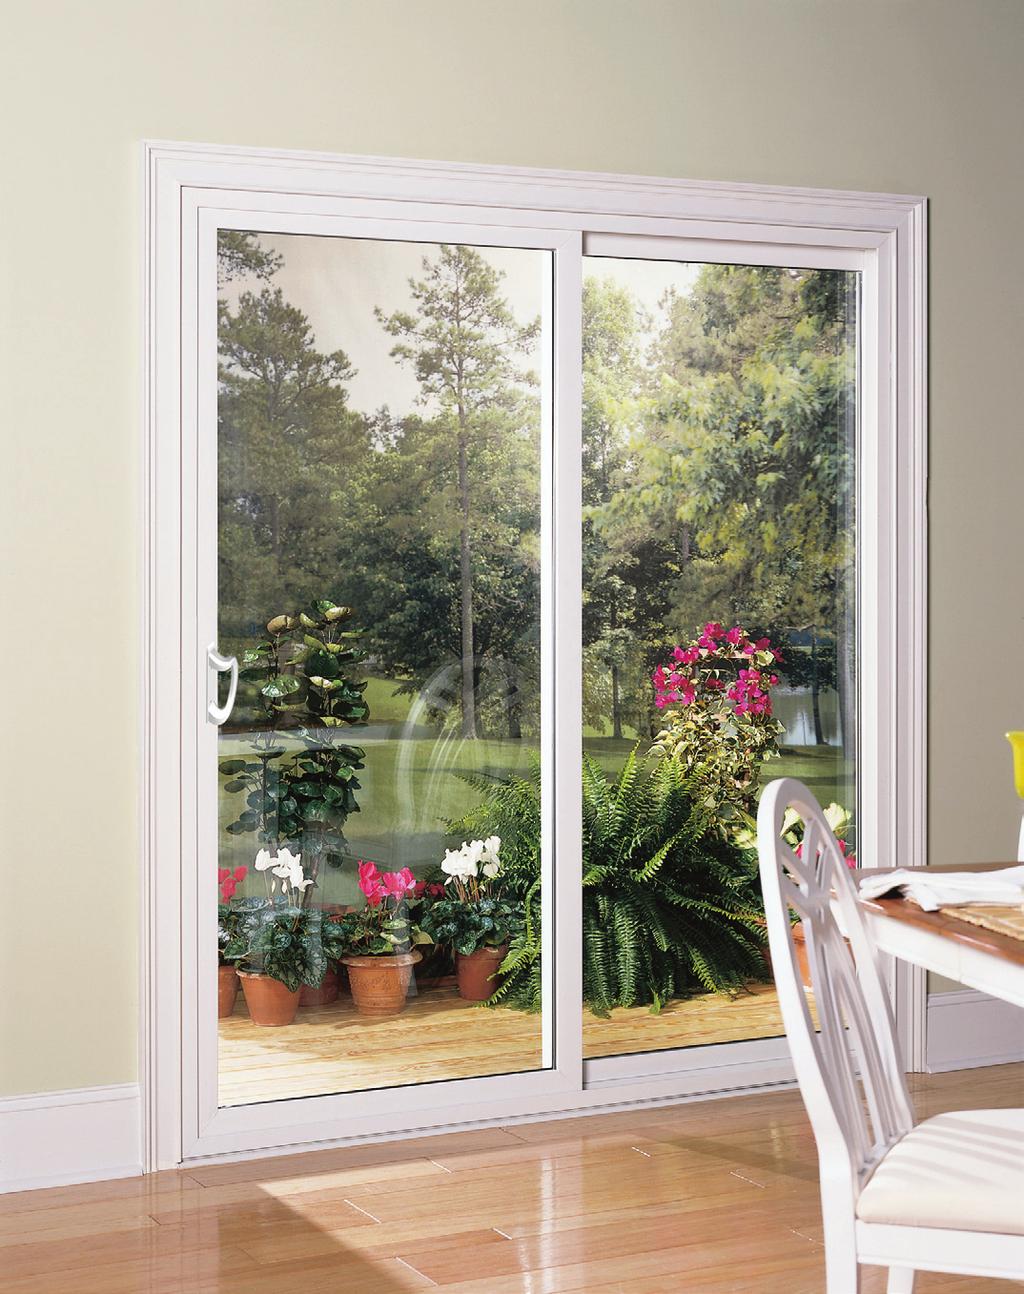 installation Triple weather-stripping enhances thermal efficiency E asy to operate casement window opens a full 90 degrees for maximum ventilation and comfort Concealed hinge and operating hardware